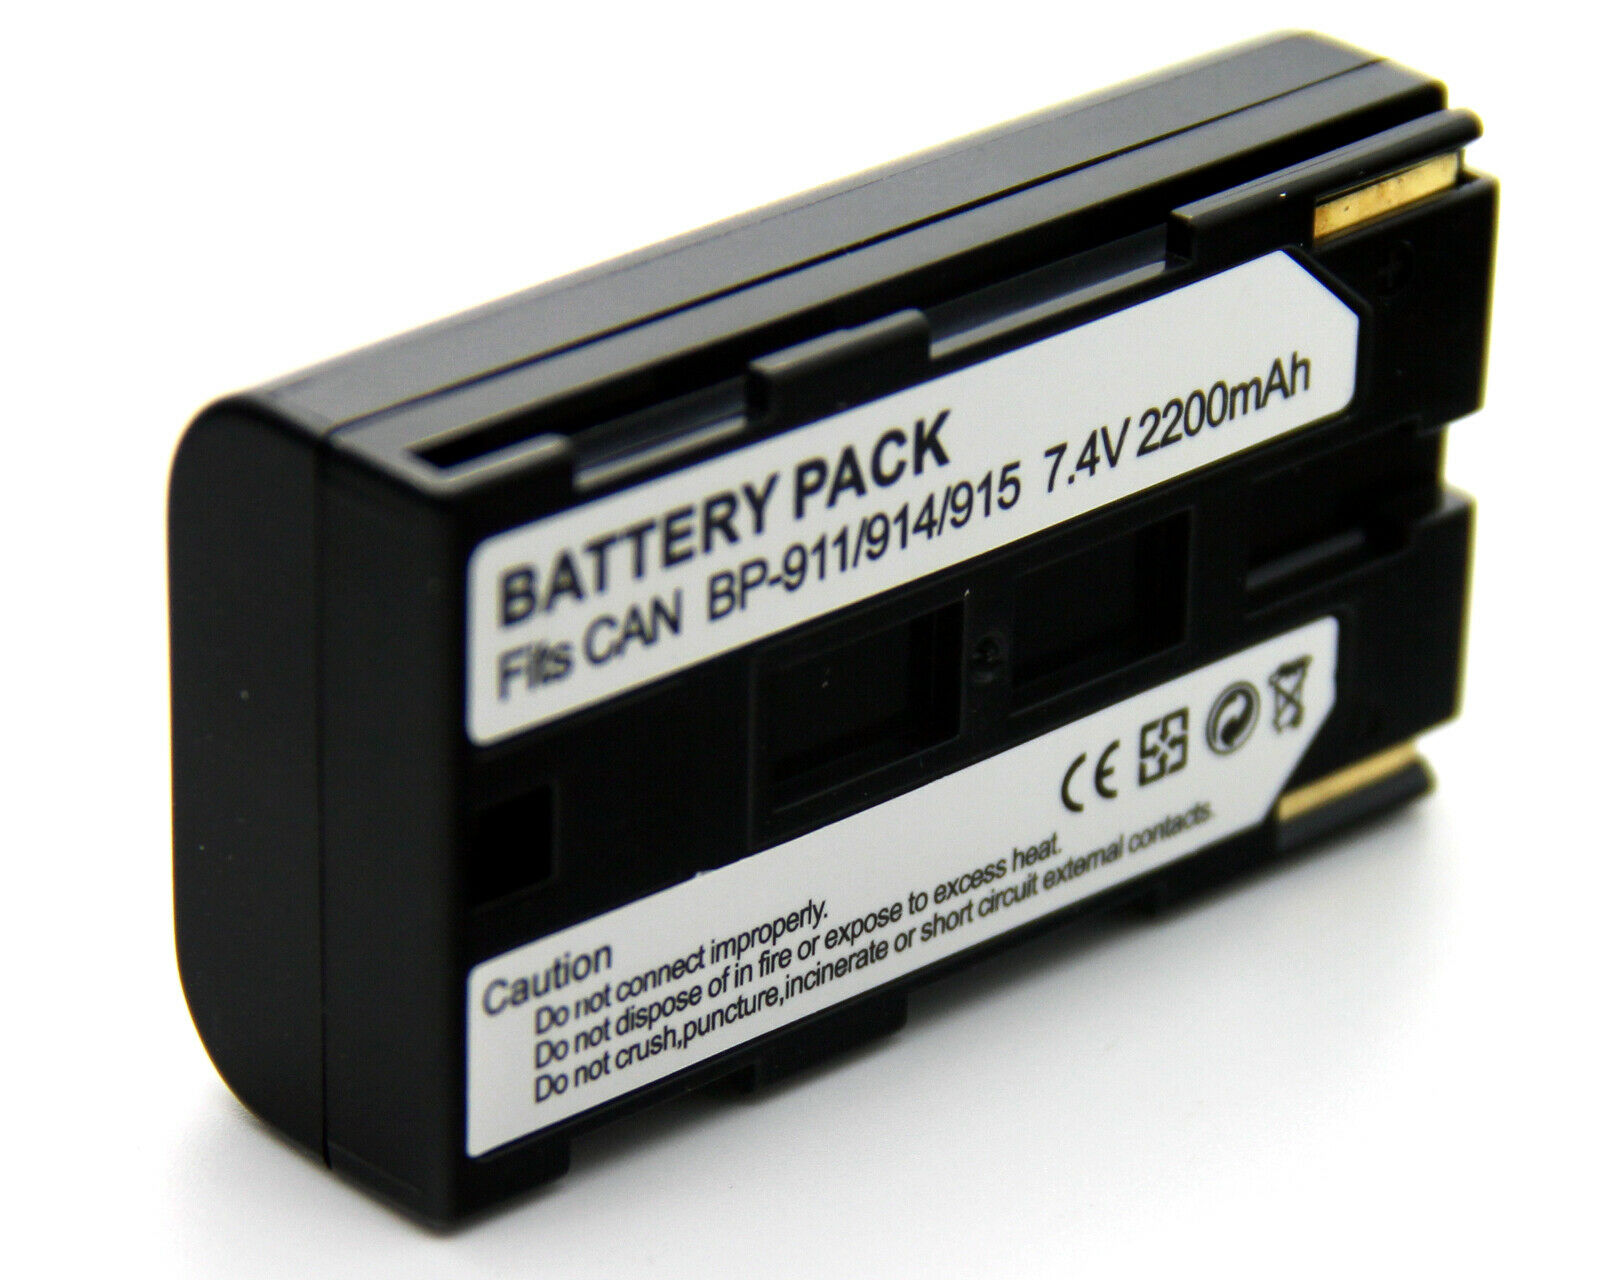 BP-911 BP-915 2200mAh Camera Battery For Canon EOS C100 and more